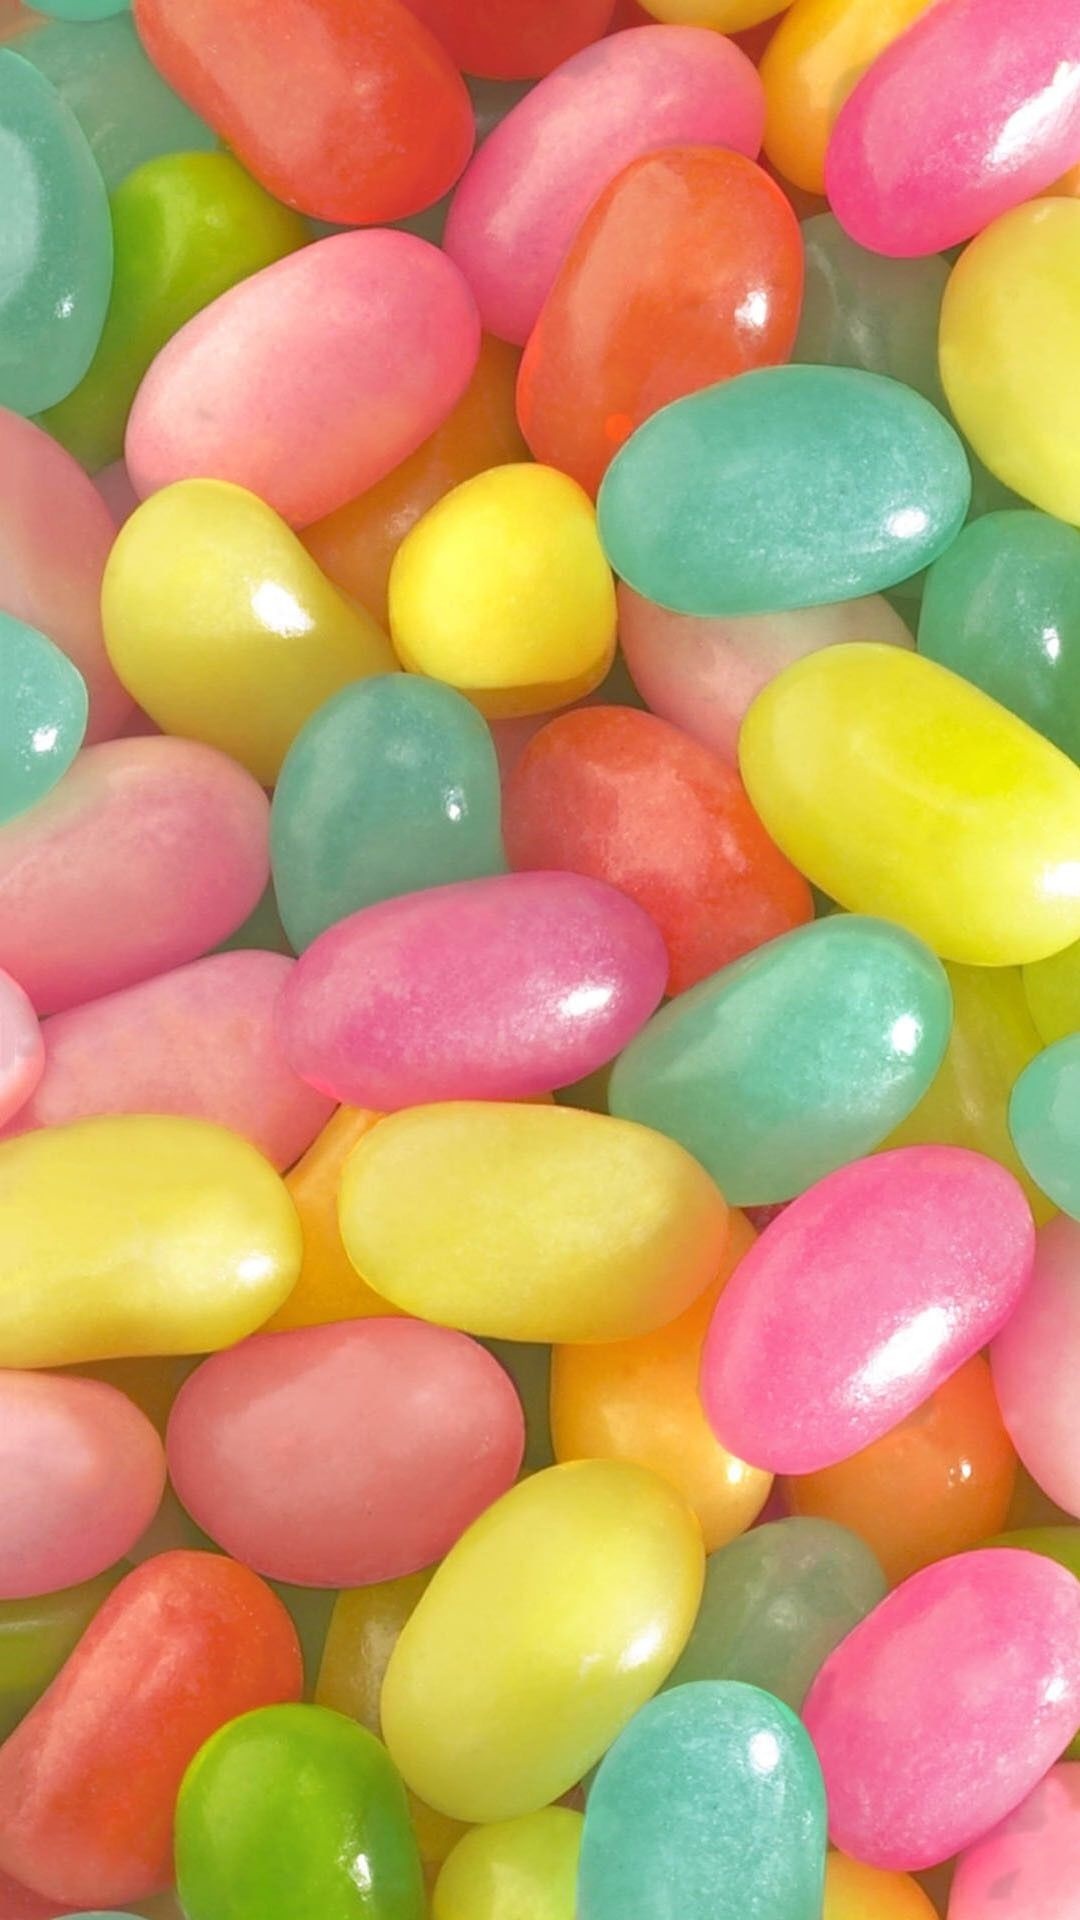 Easter-themed jelly beans, Festive candy, Colorful confection, Easter baking inspiration, 1080x1920 Full HD Handy